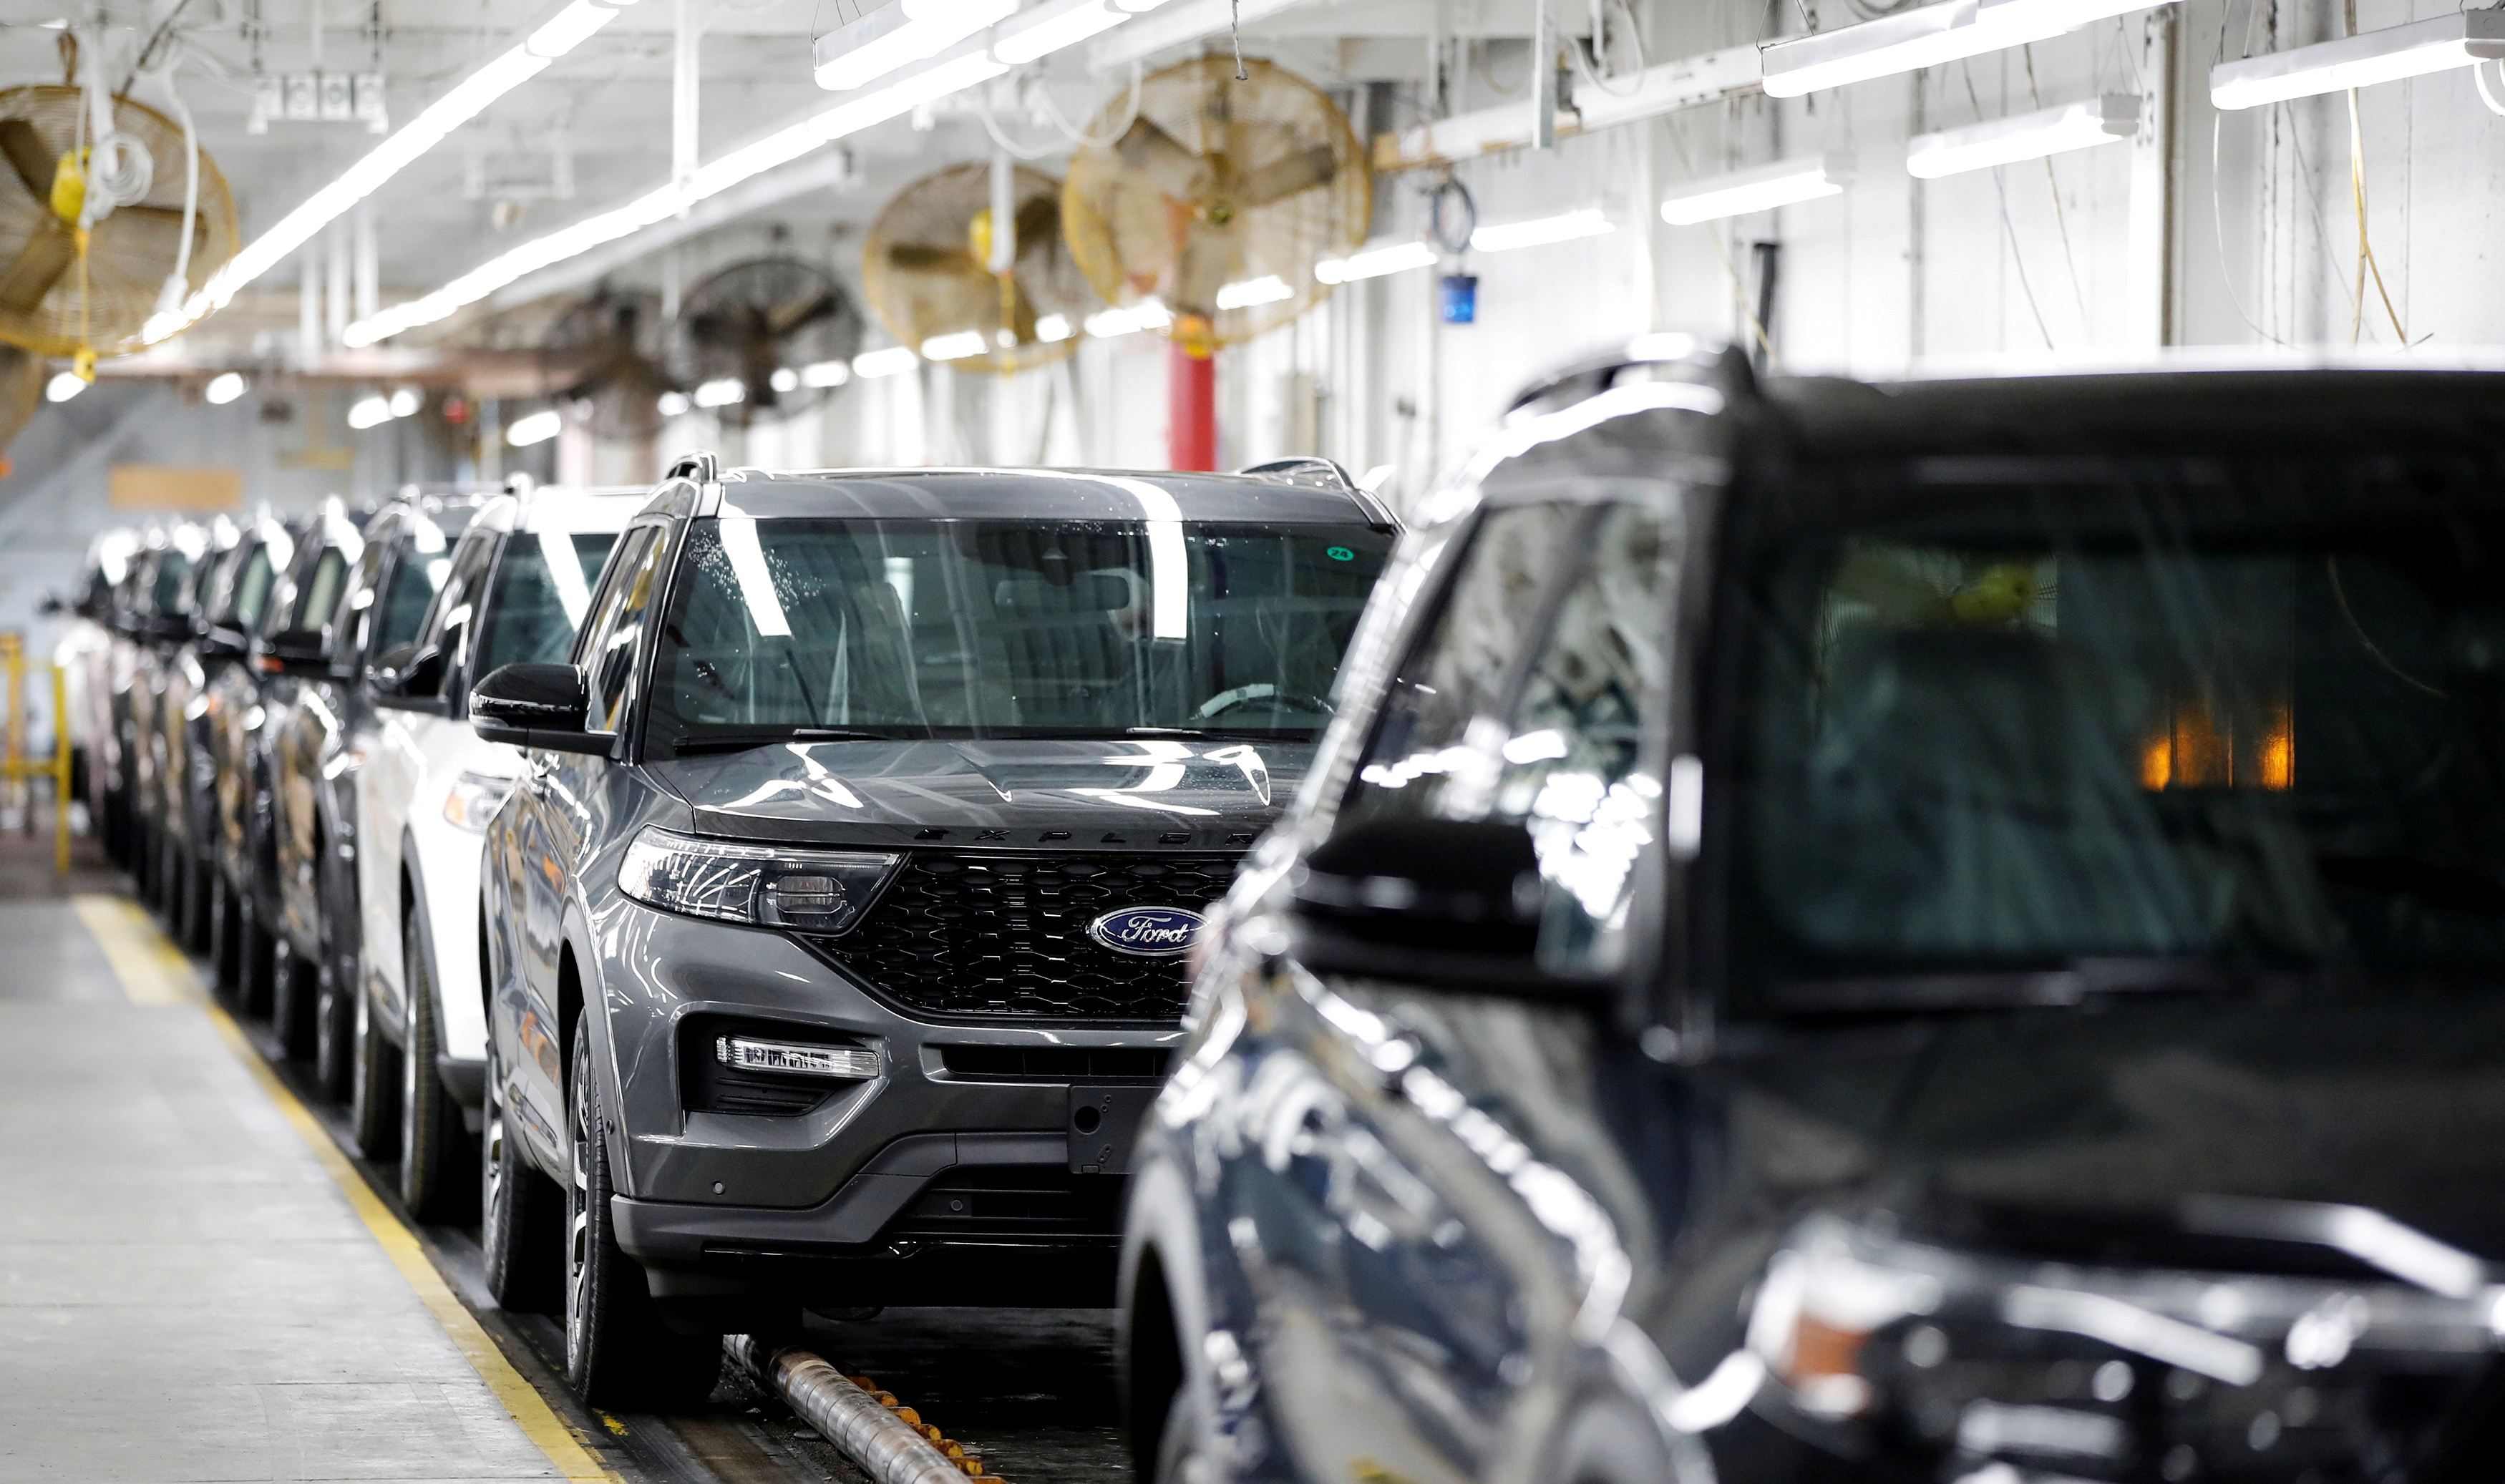 2020 Ford Explorer cars are seen at Ford's Chicago Assembly Plant in Chicago